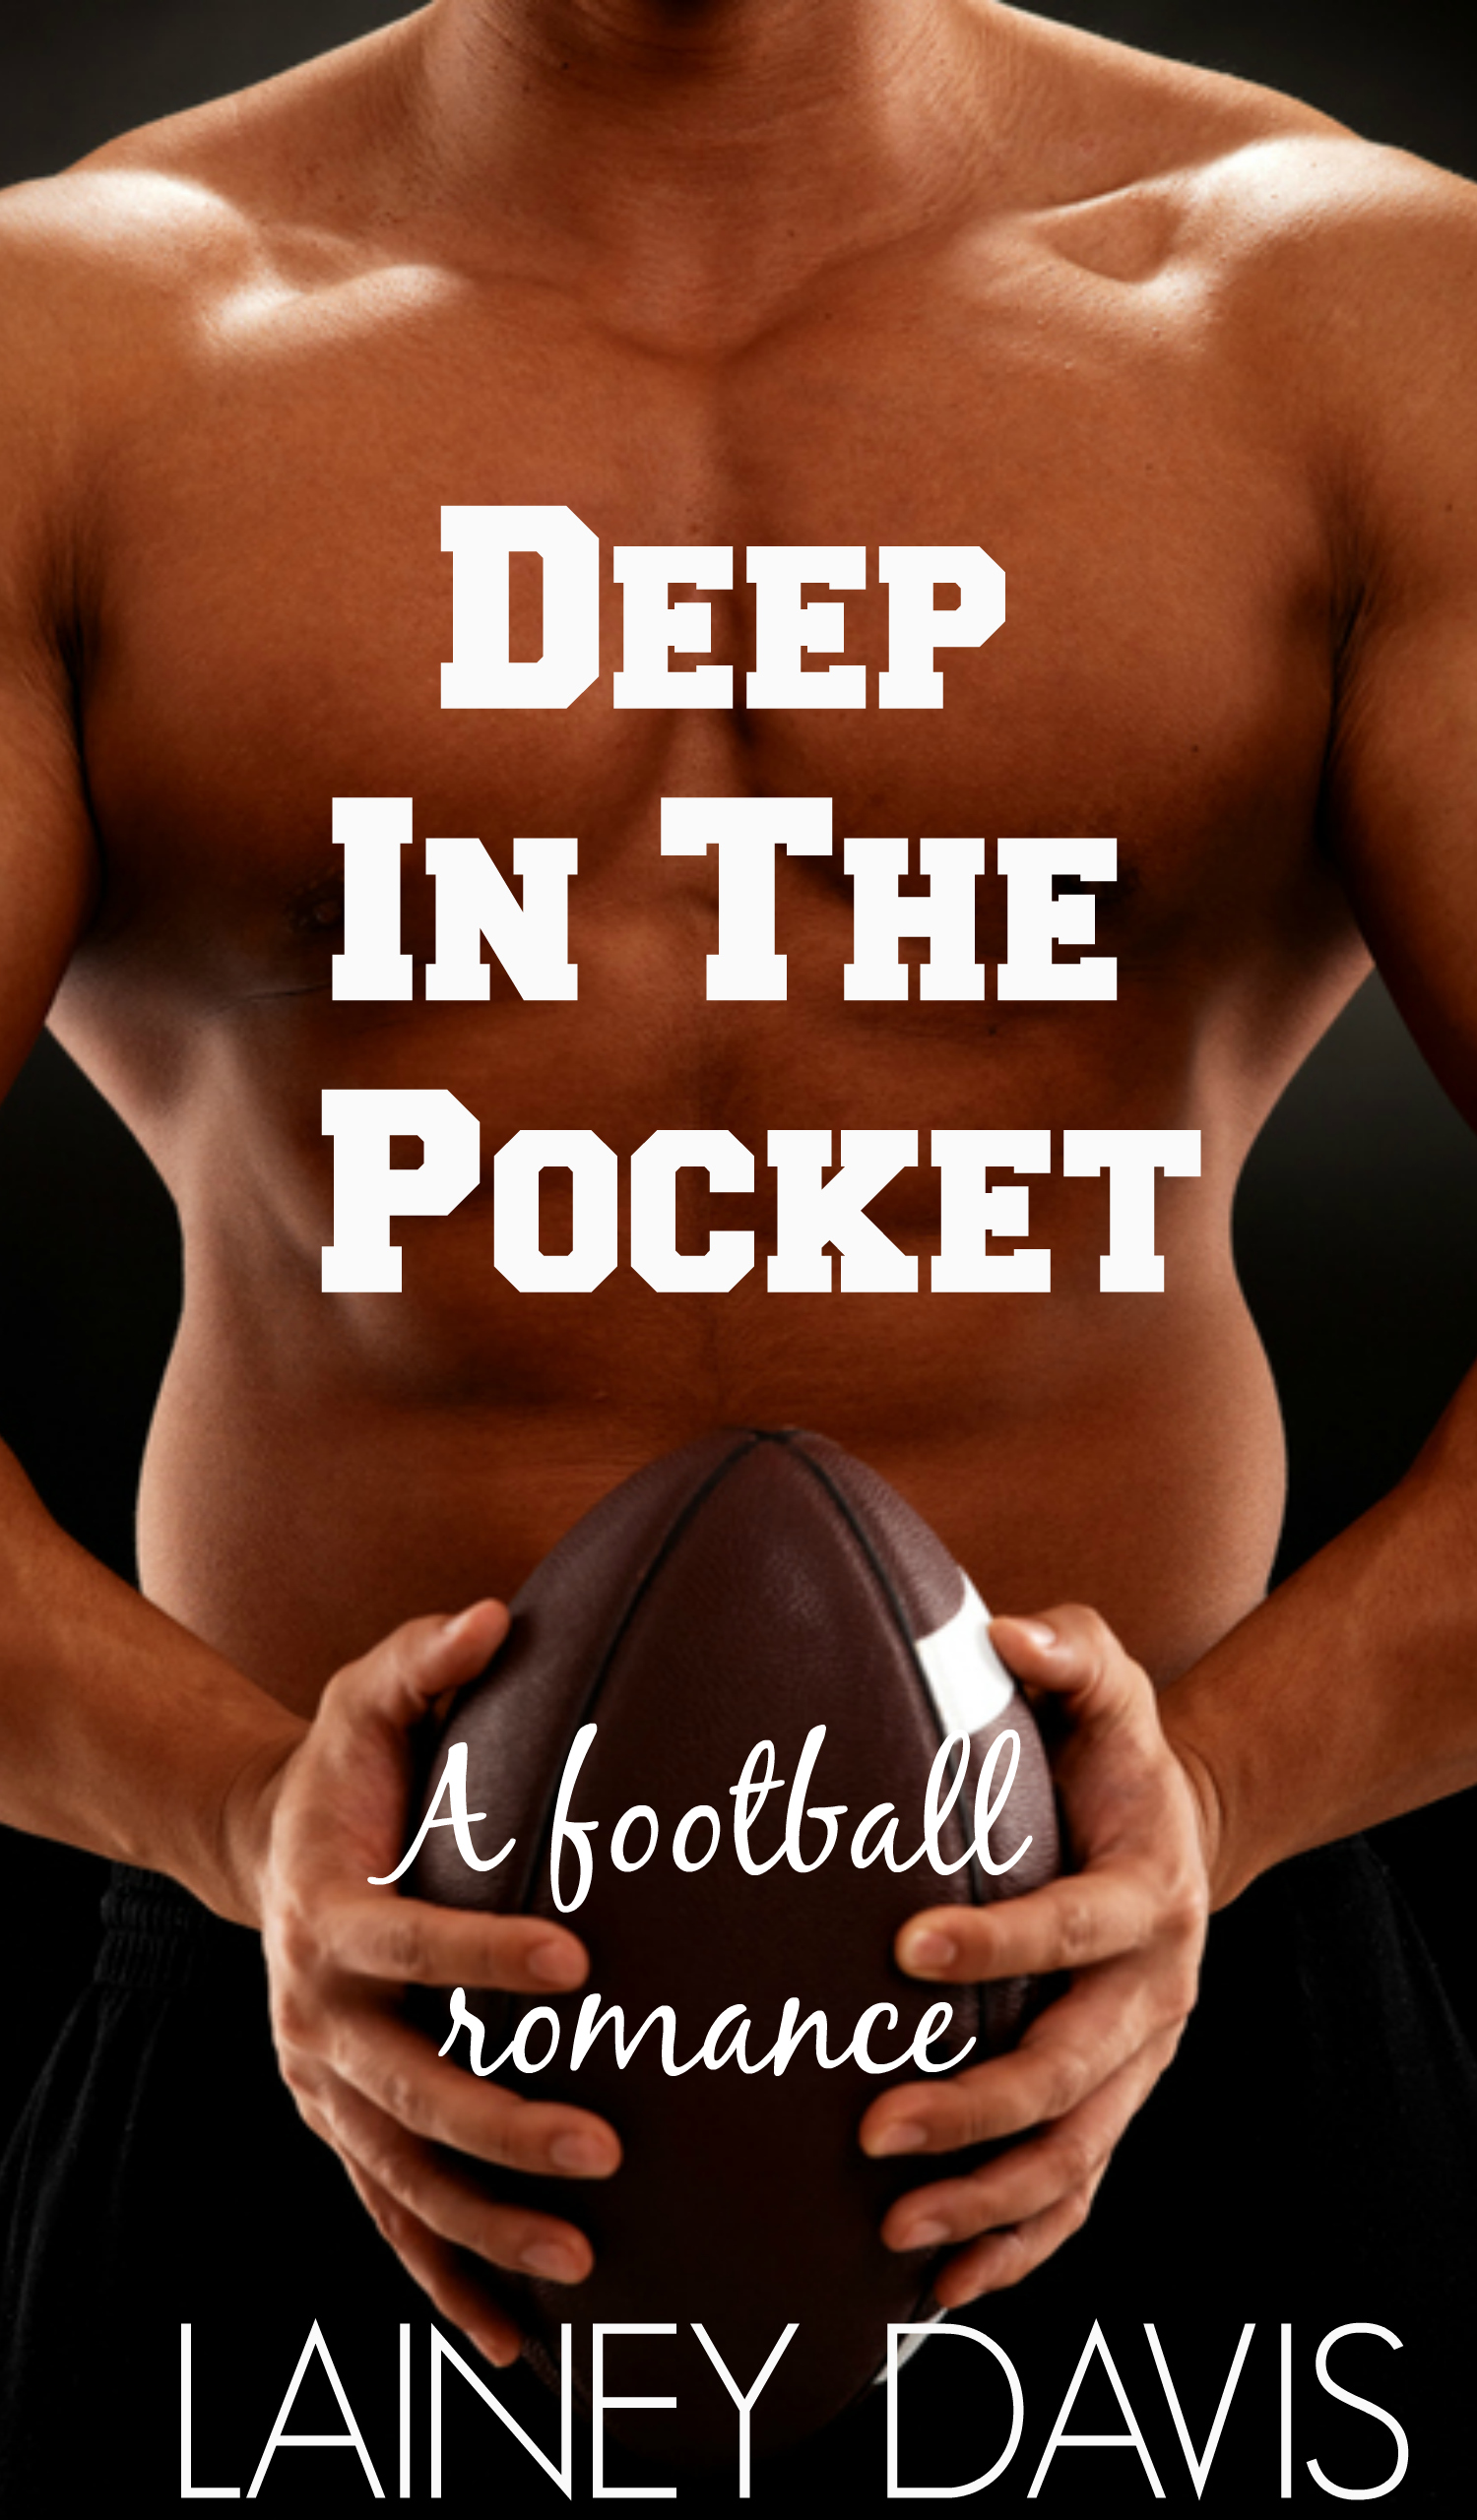 FREE: Deep in the Pocket by Lainey Davis